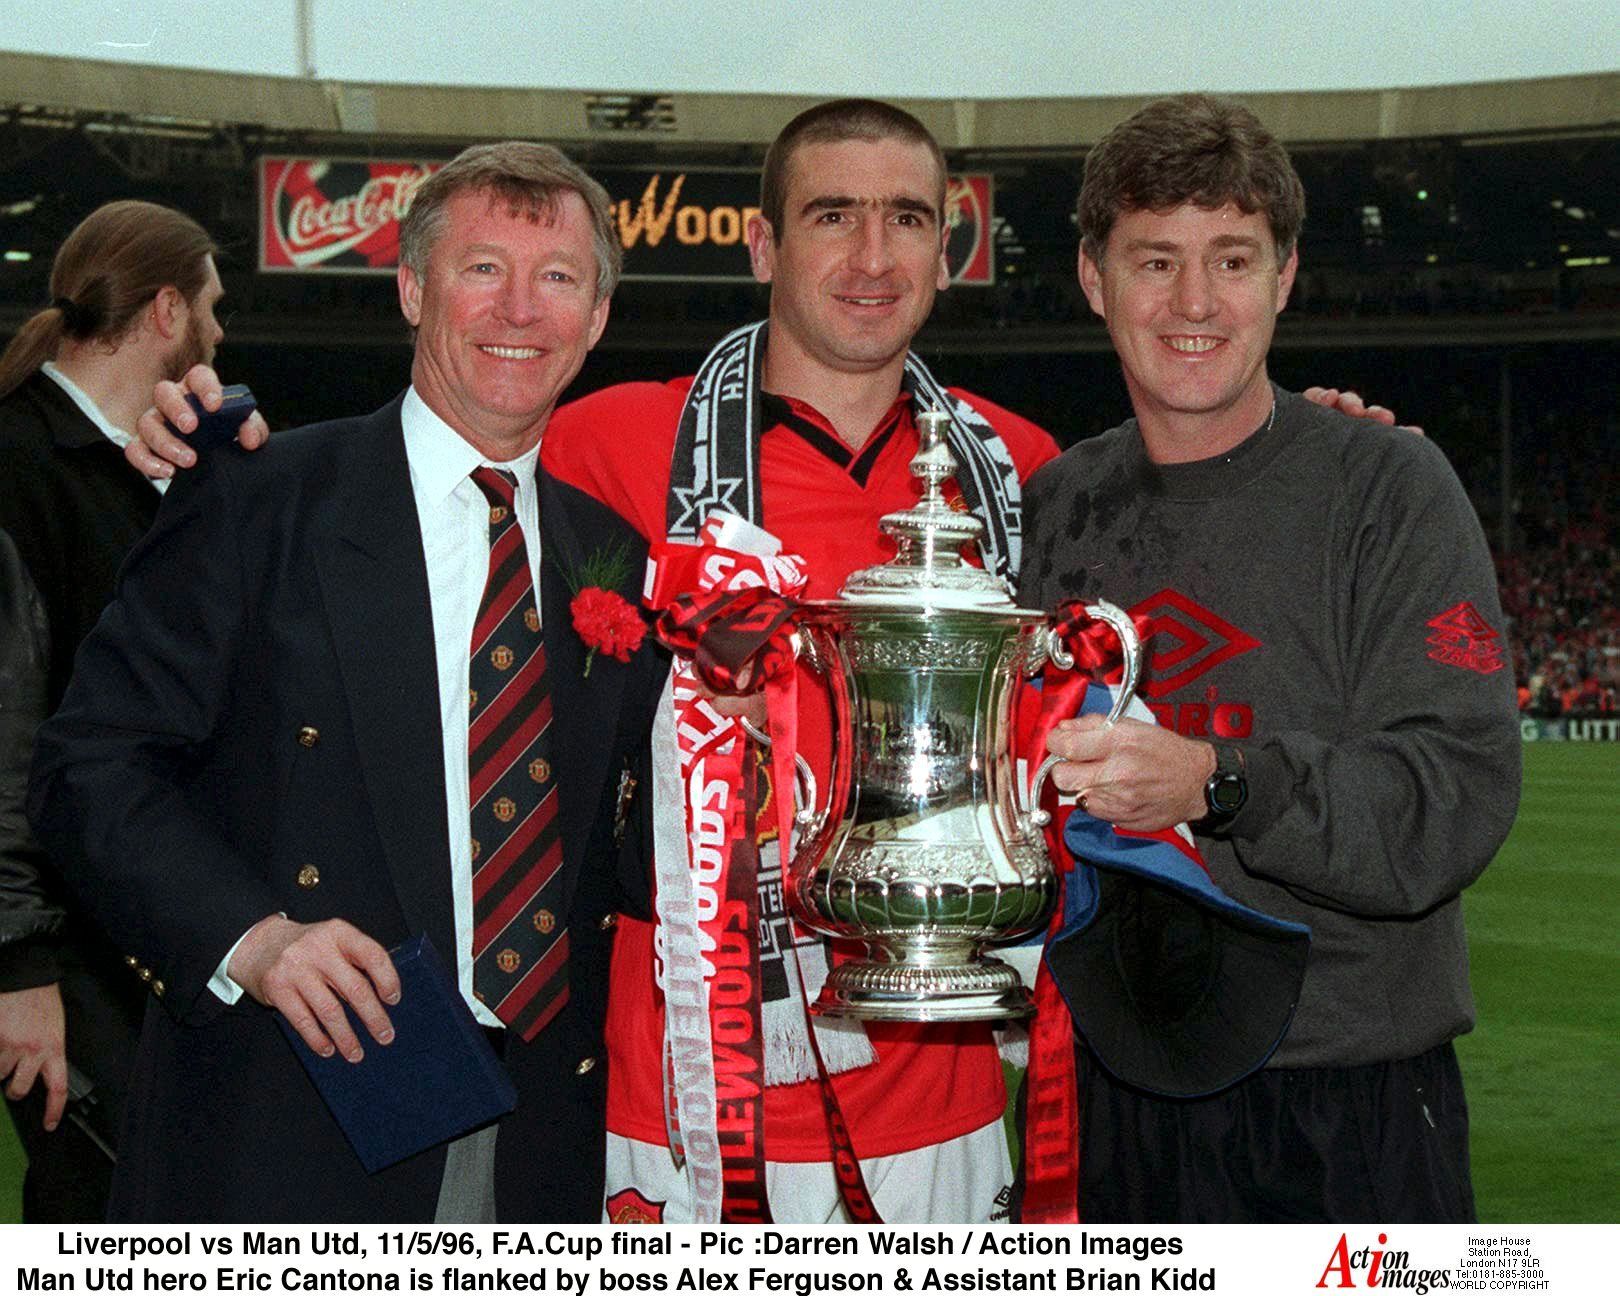 Eric Cantona with Alex Ferguson & Assistant Brian Kidd after Manchester United win the FA Cup